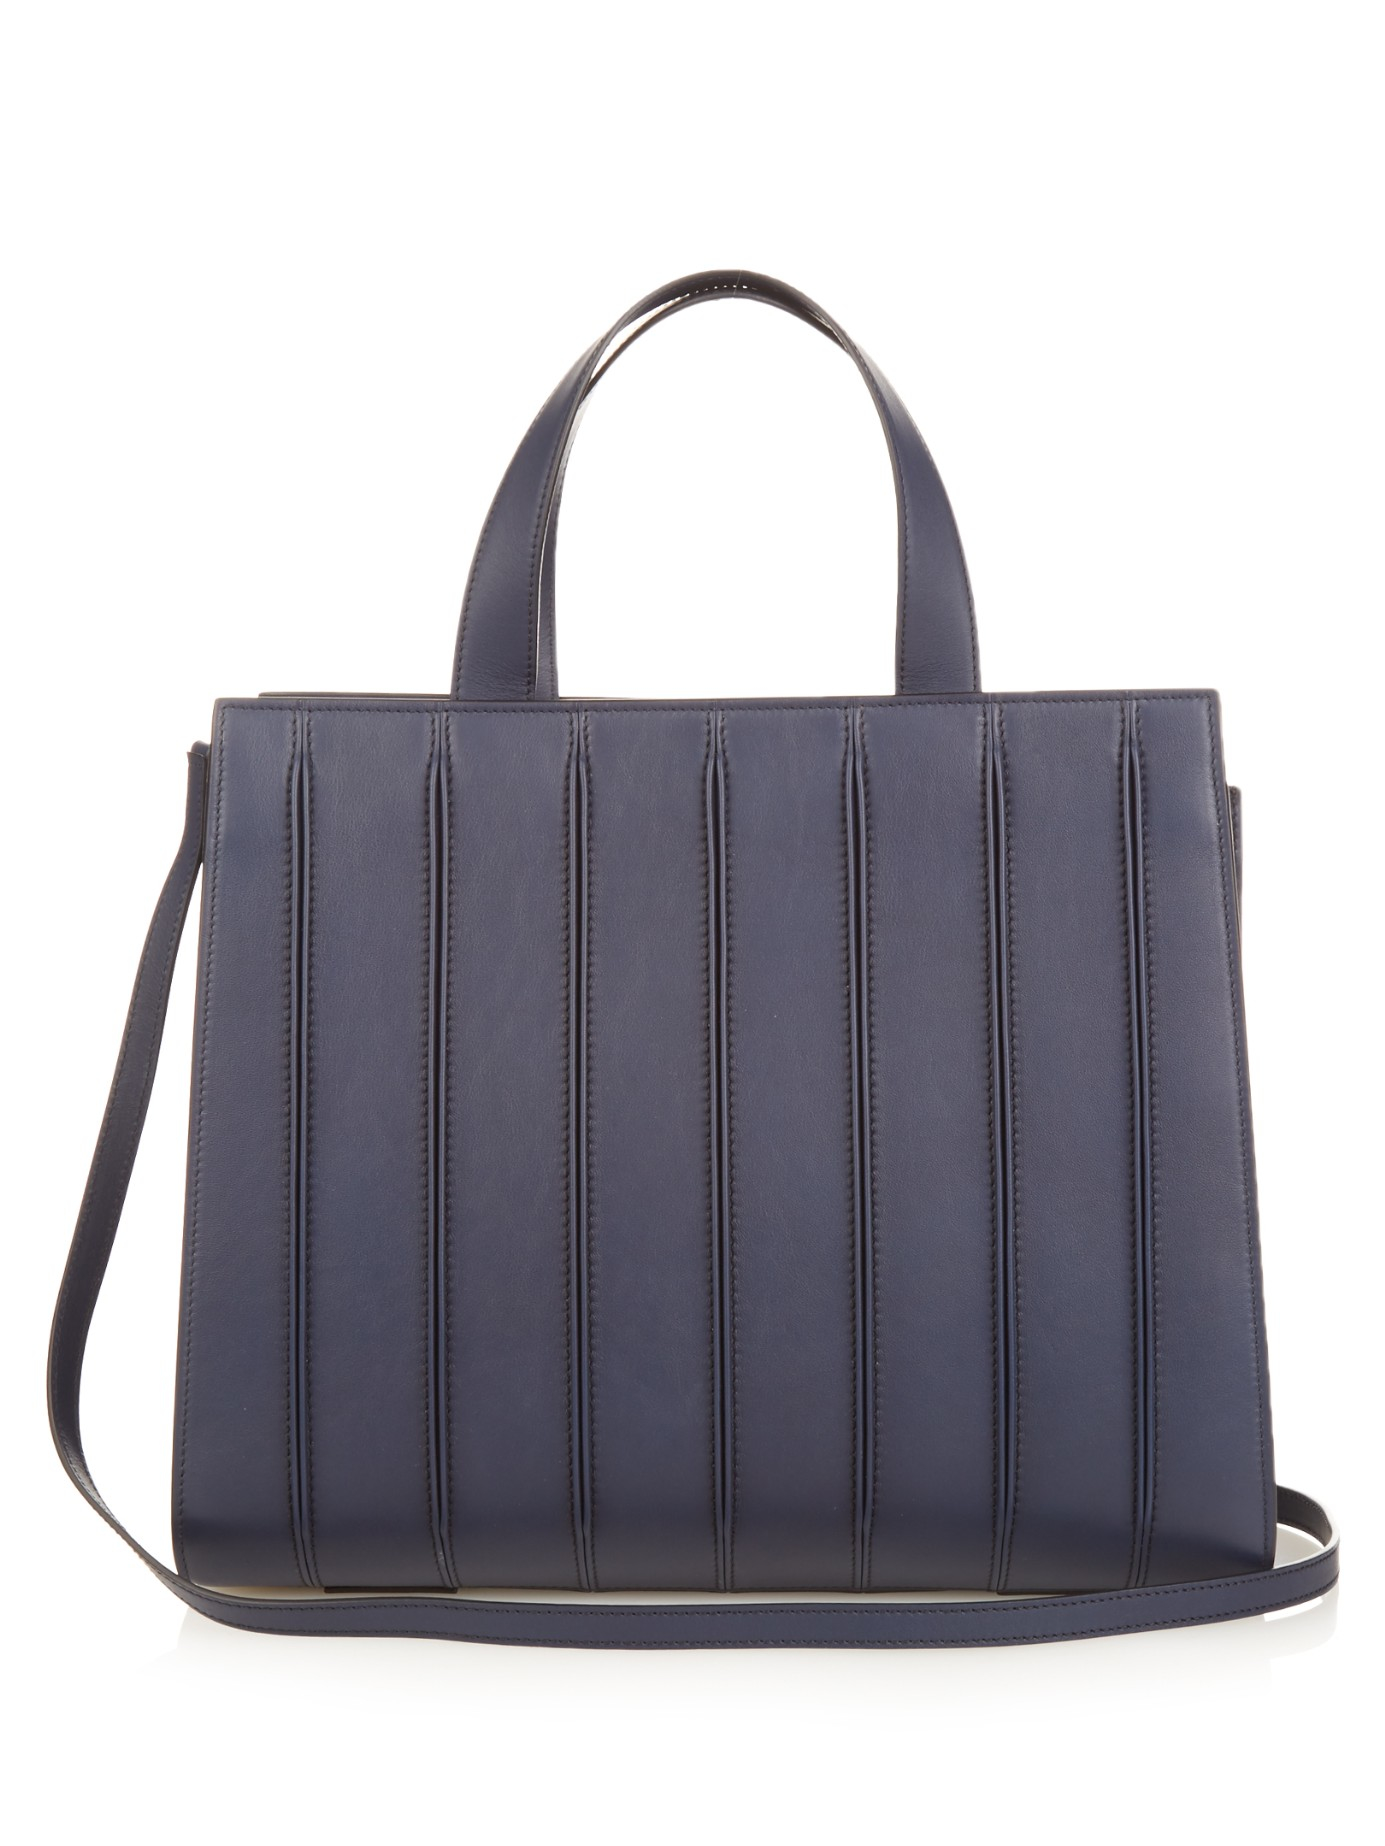 Max Mara Whitney Large Tote in Navy (Blue) - Lyst